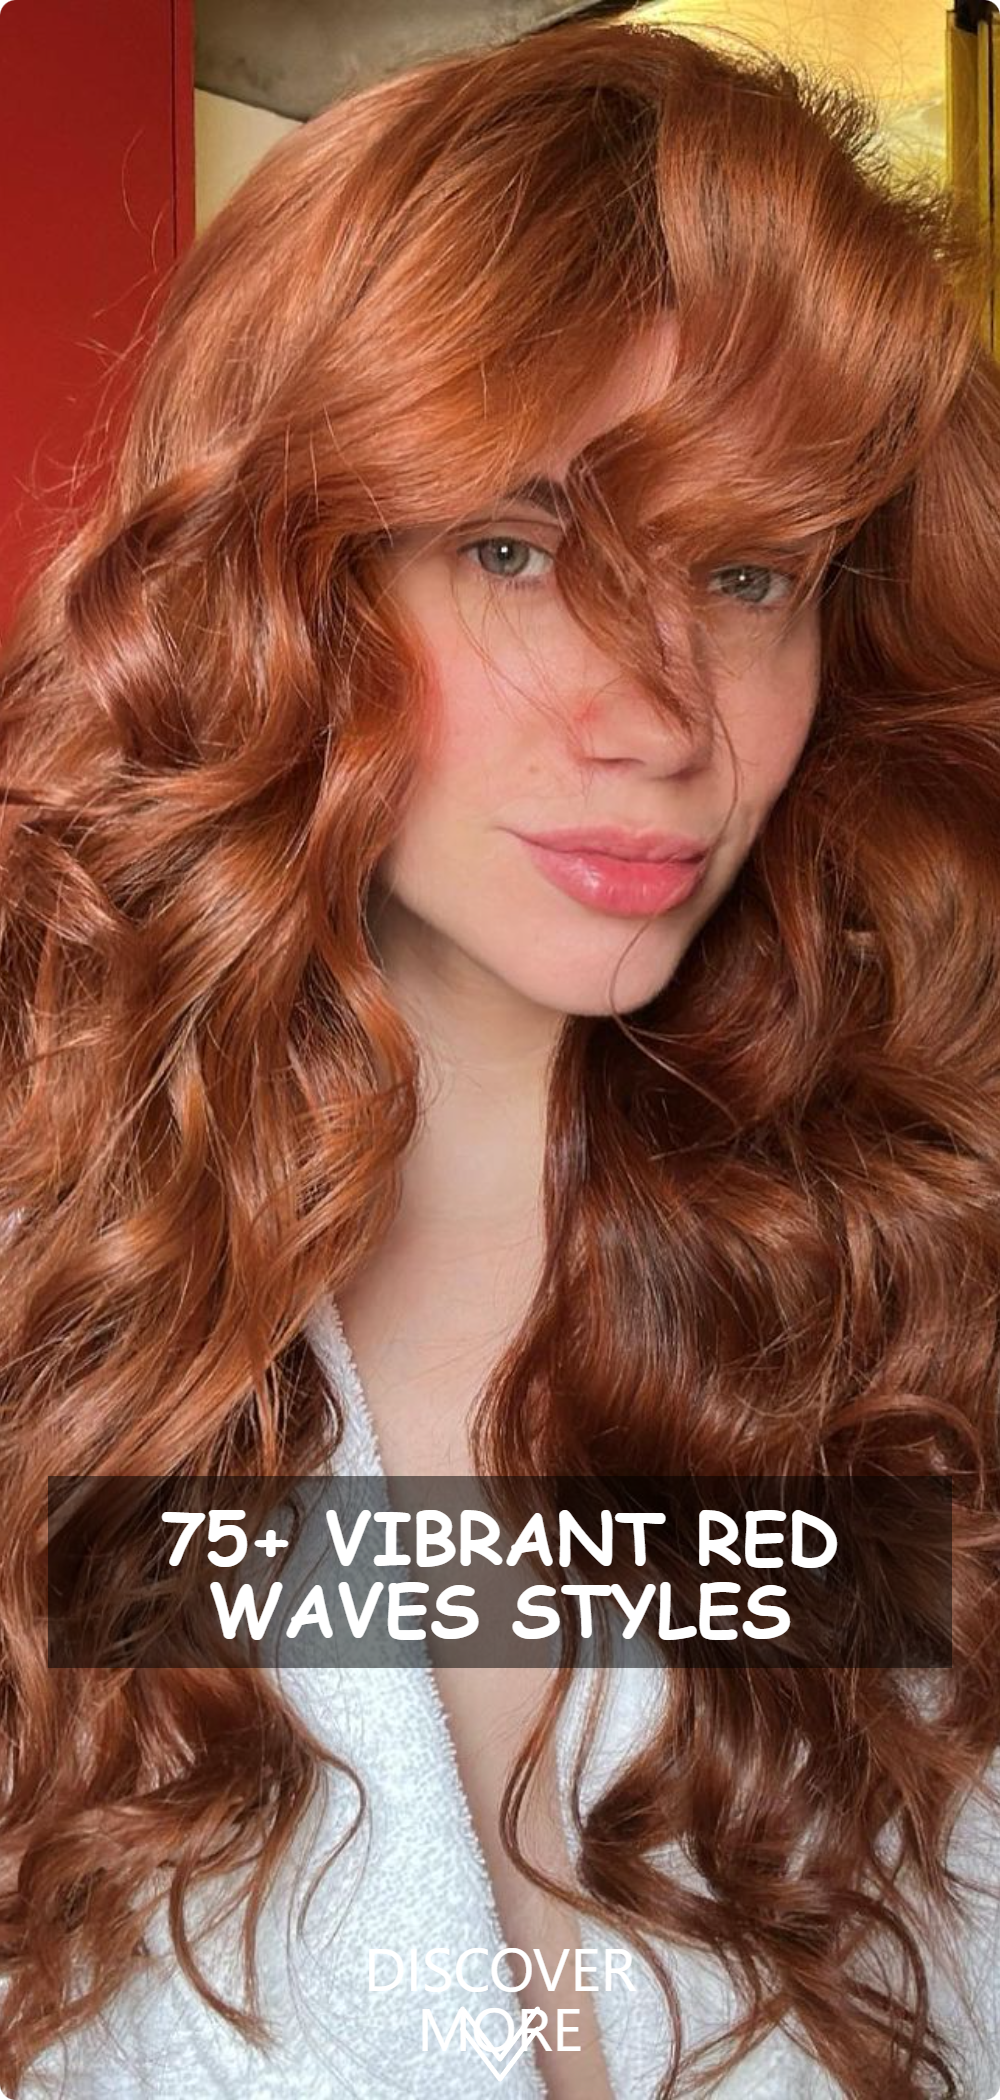 A woman with vibrant red wavy hair posing for a selfie